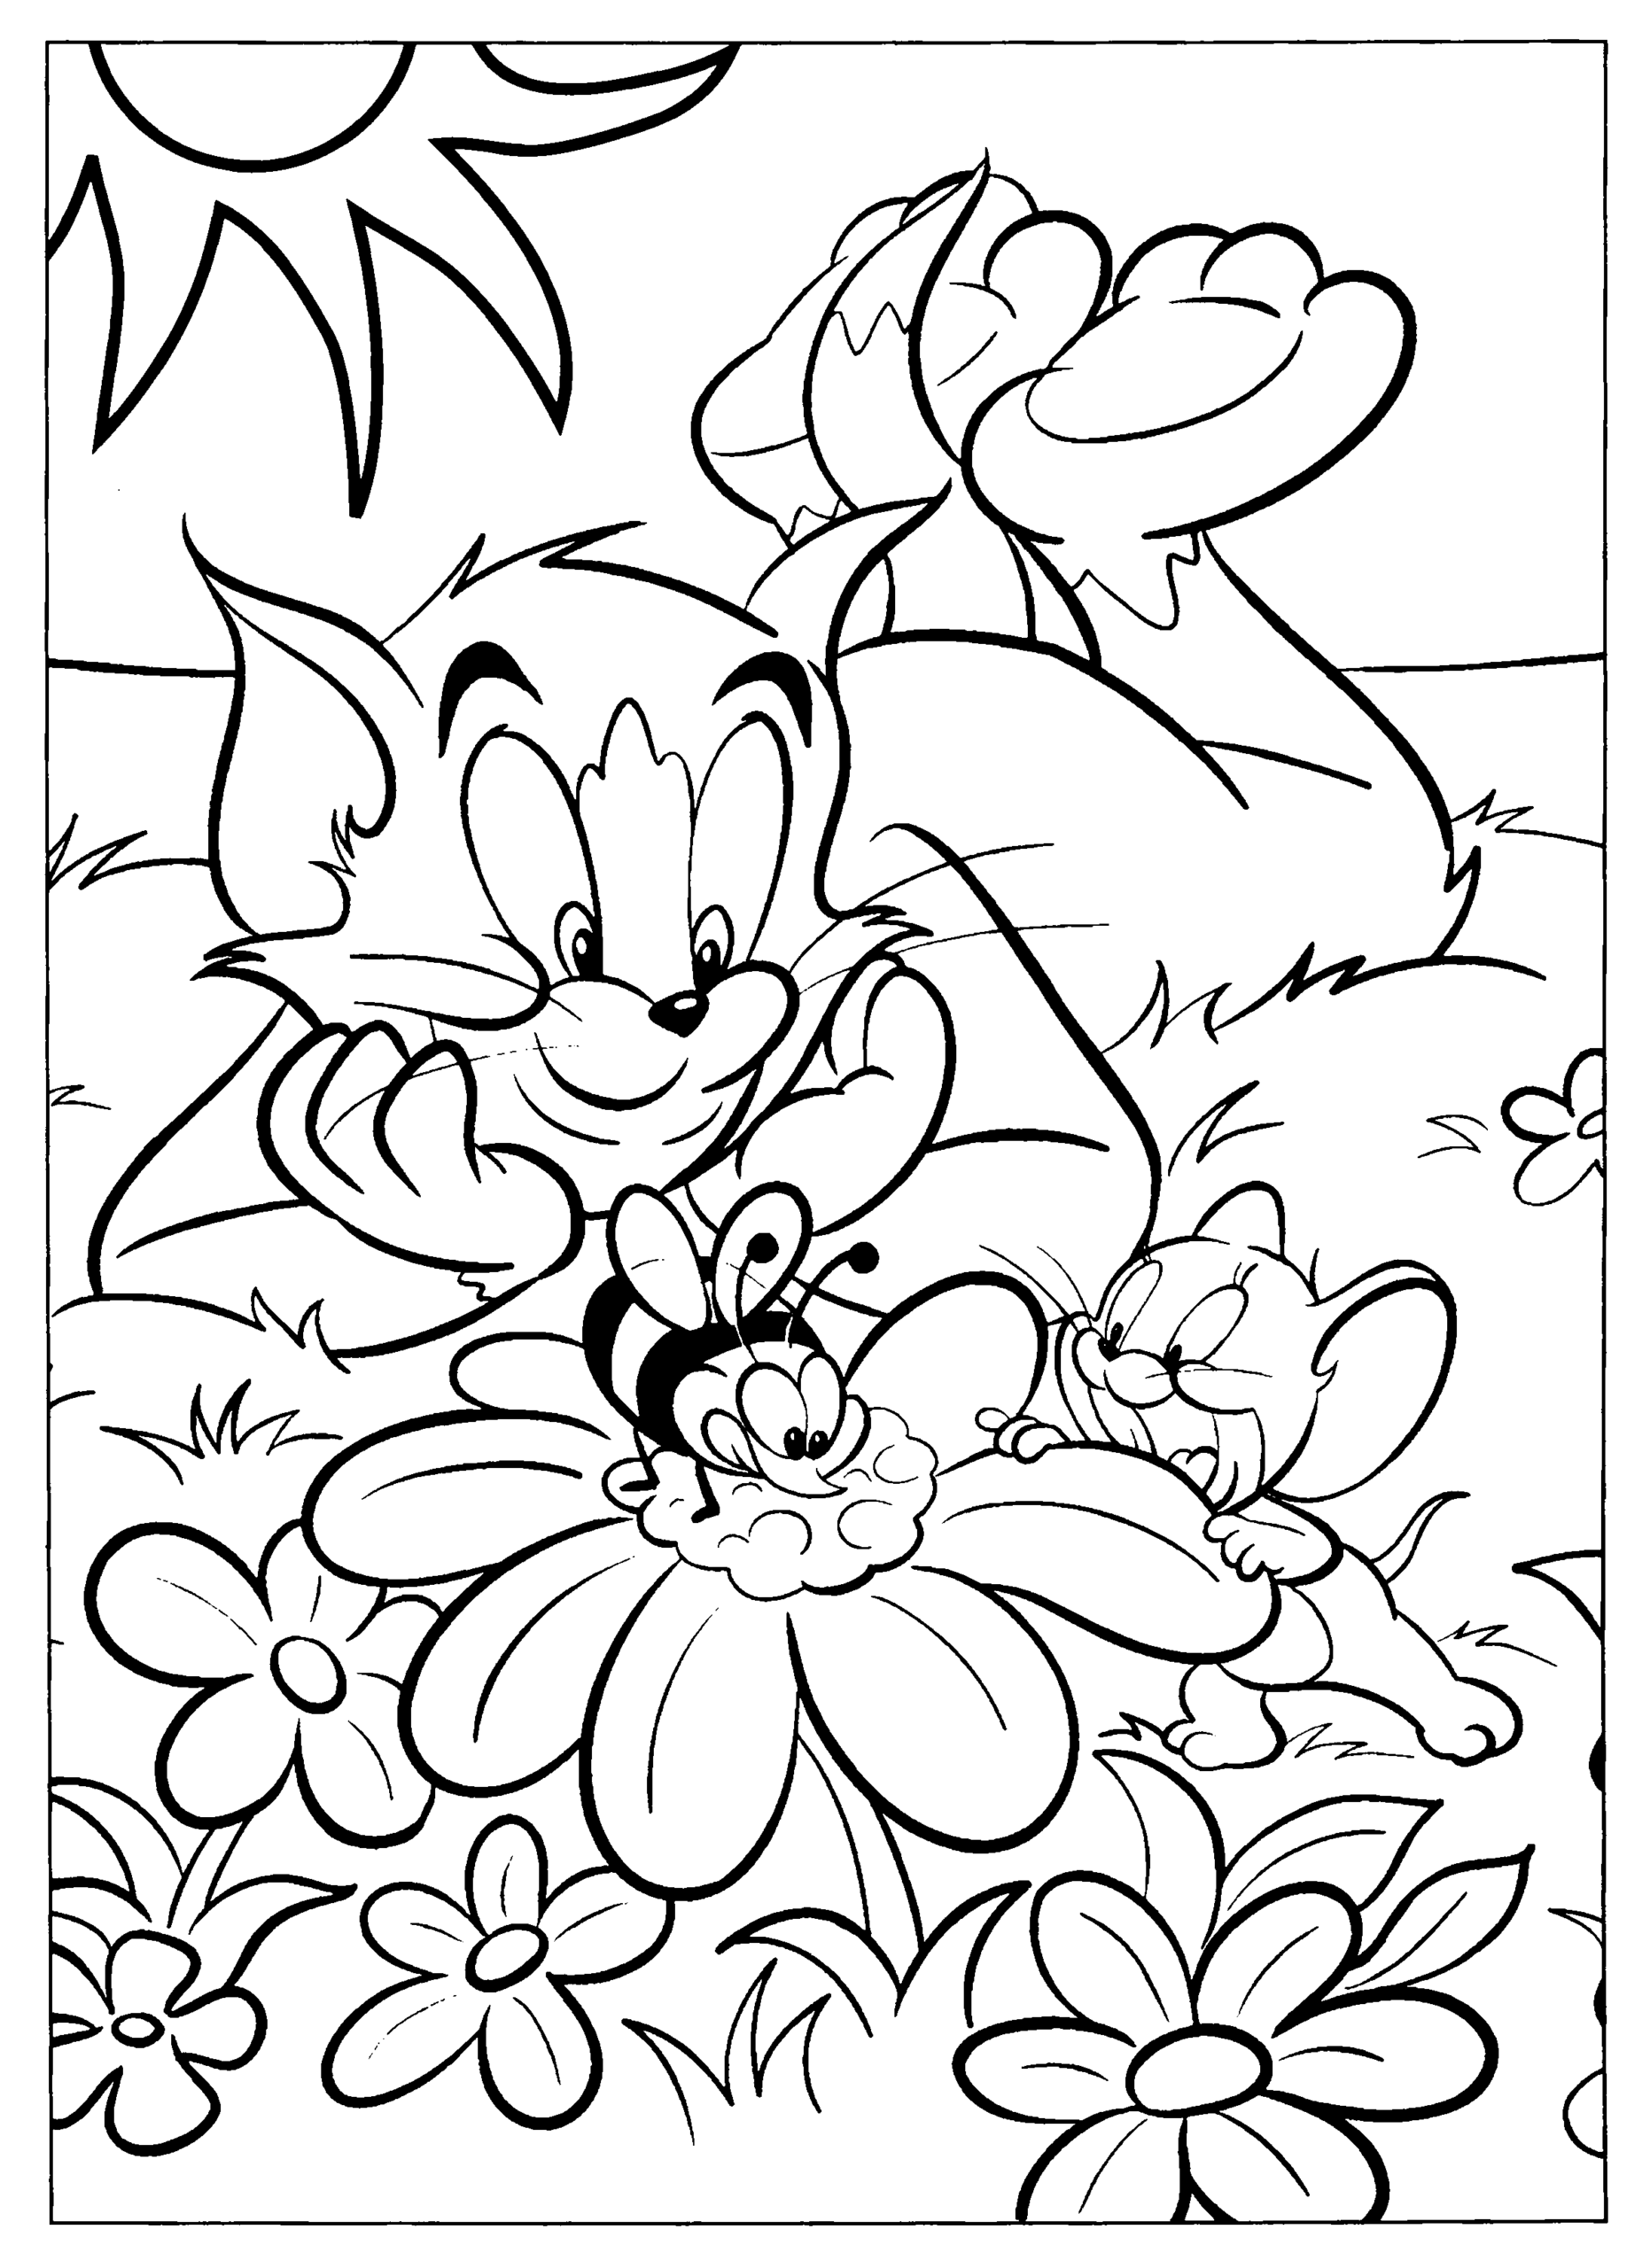 Tom and Jerry Coloring Pages TV Film Tom and Jerry Printable 2020 10170 Coloring4free